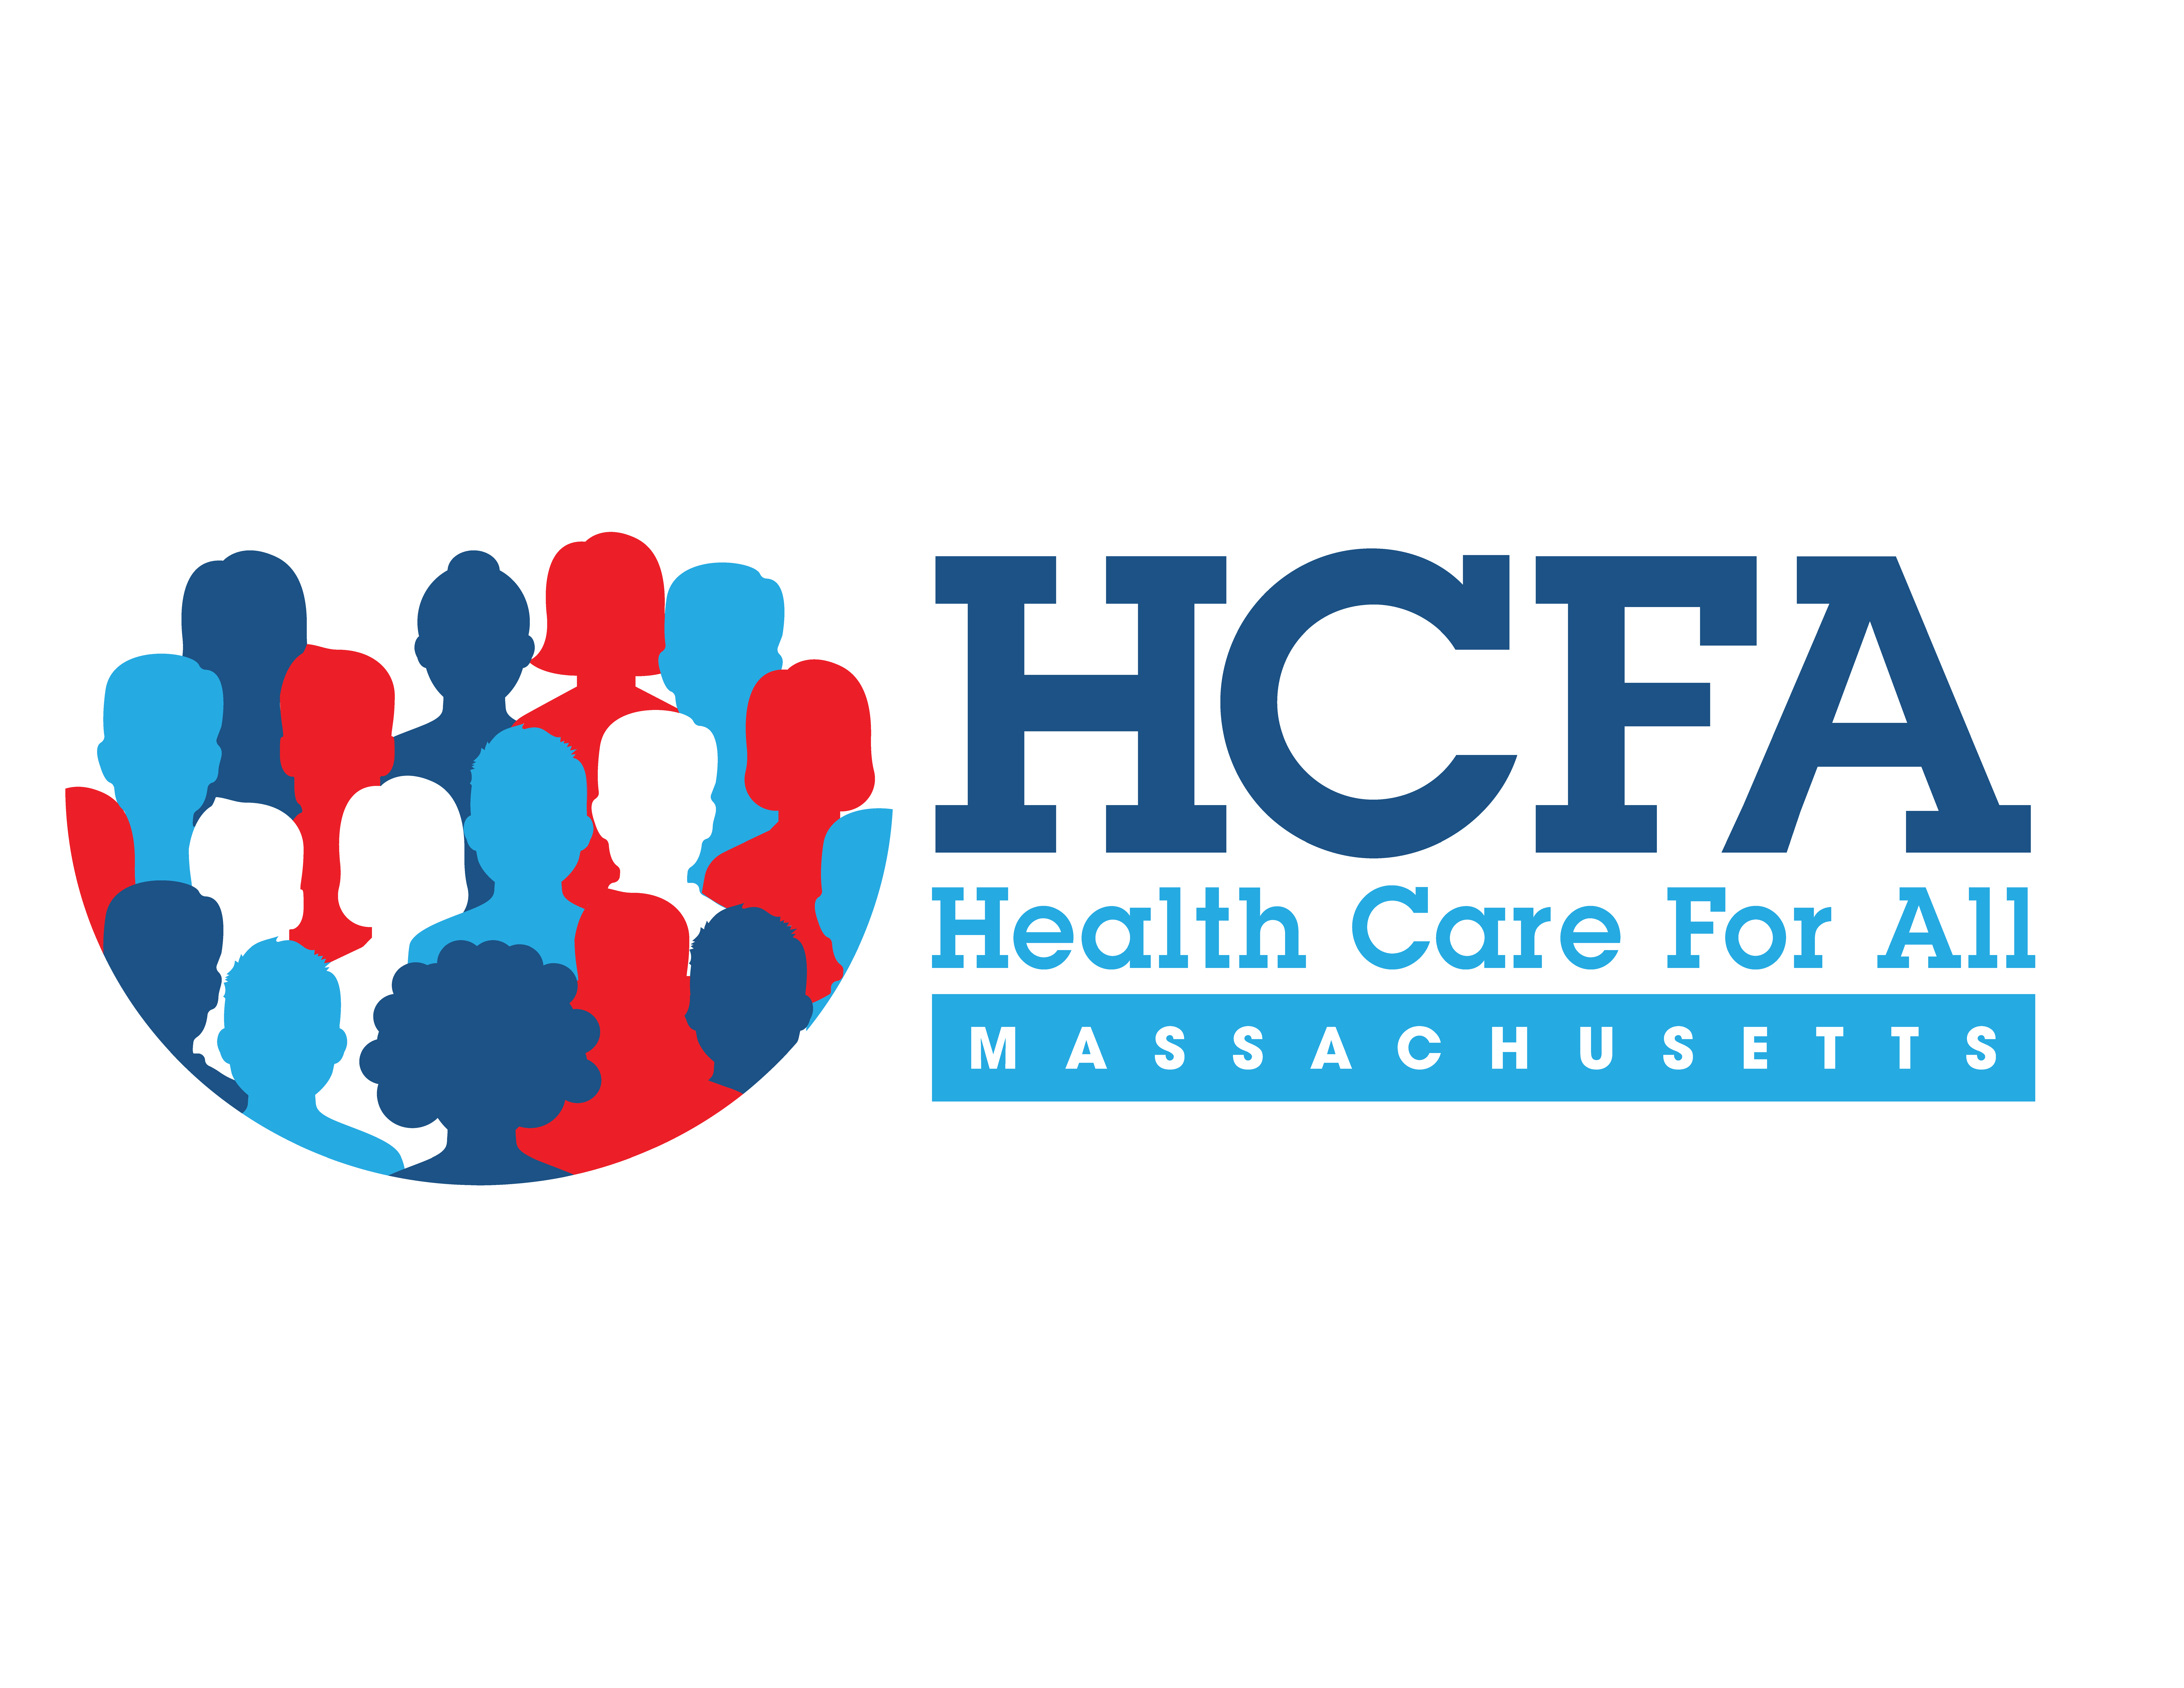 STATEMENT: Health Care For All Applauds $5 Million for MassHealth Redetermination and Vaccination Outreach Campaign in ARPA Spending